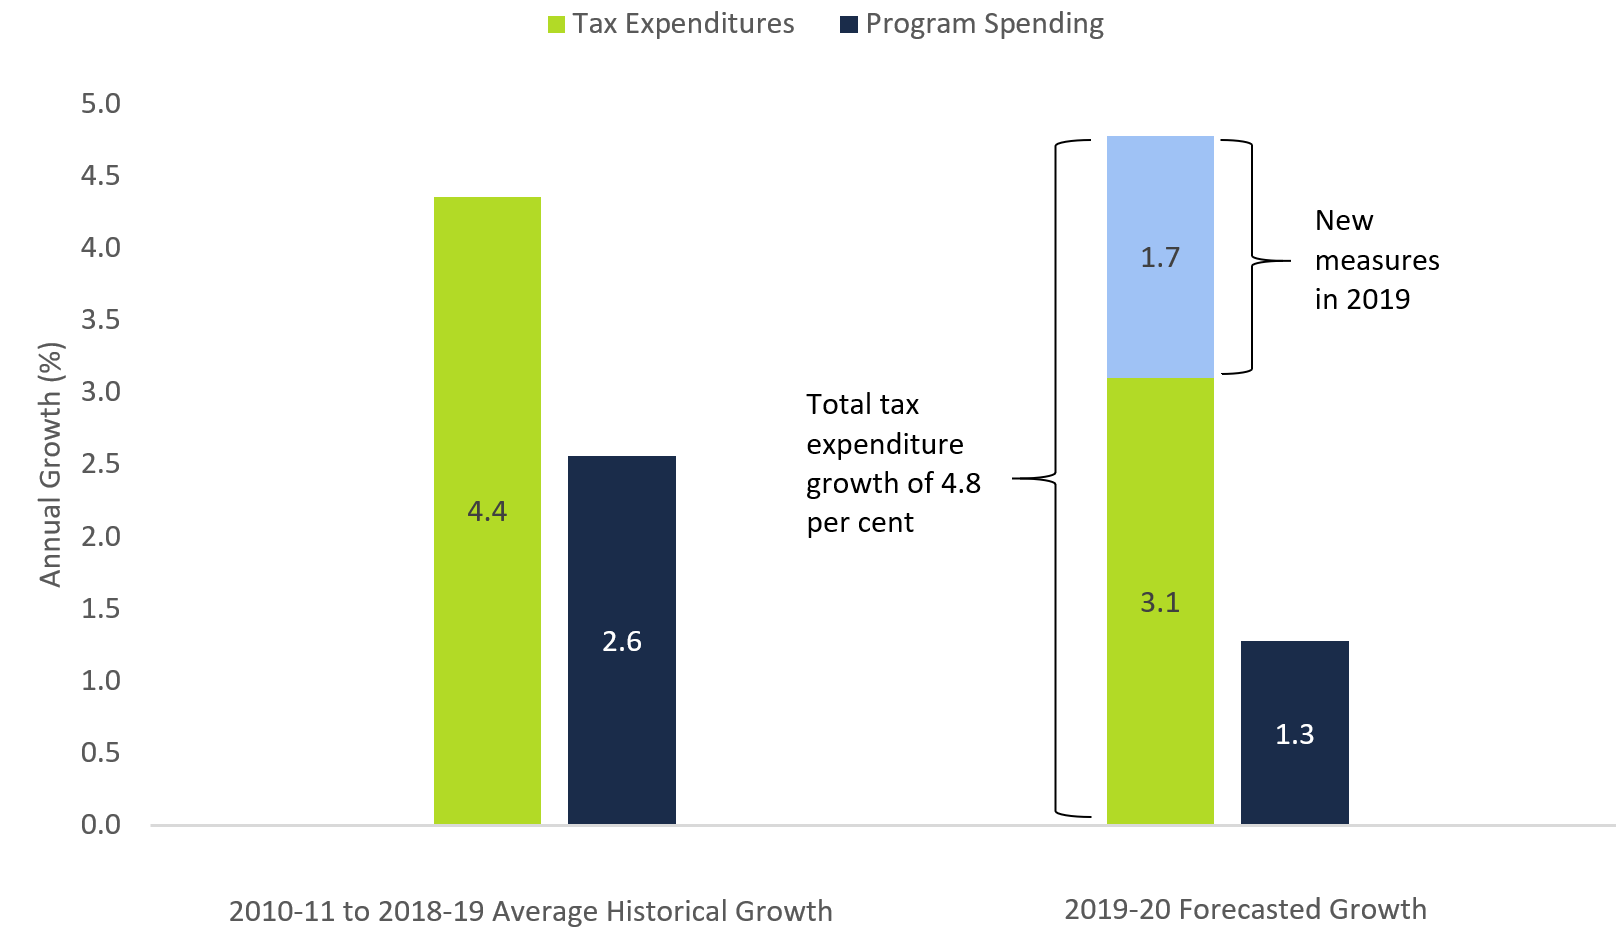 Figure 4 2: Tax expenditure spending growth to outpace program spending growth in 2019-20